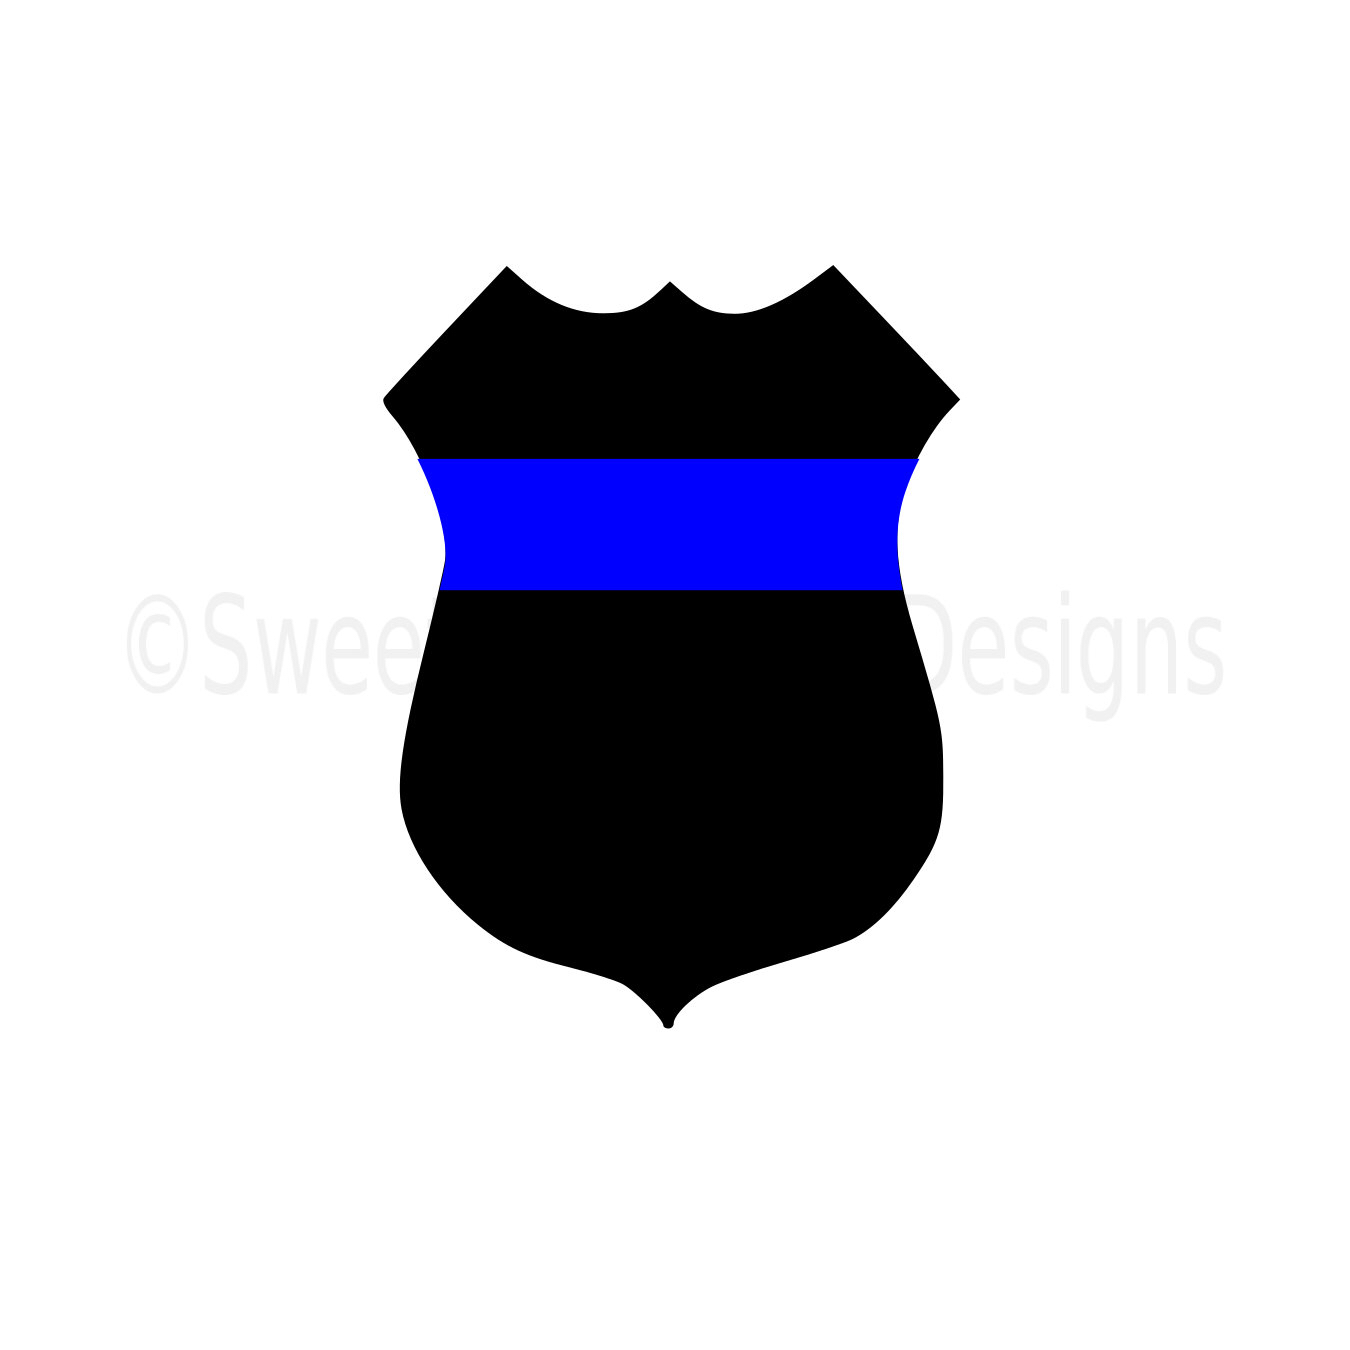 Police at getdrawings com. Badge clipart silhouette